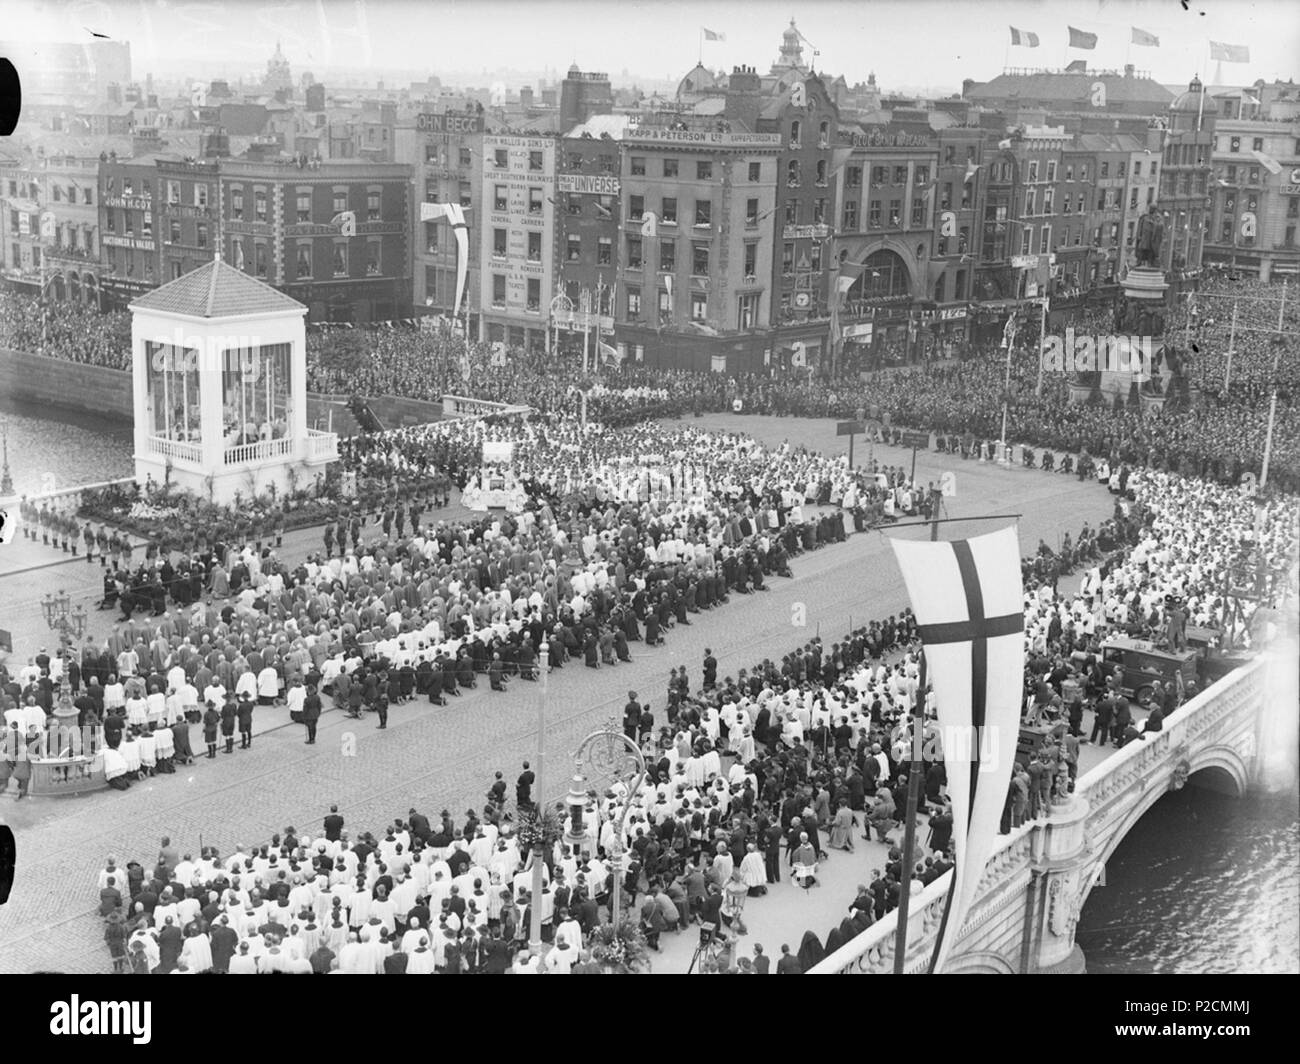 . This amazing scene is the closing ceremony of the Eucharistic Congress that was held in Dublin in June 1932. Earlier in the day, there had been a Solemn Pontifical High Mass at 1 p.m. in the Phoenix Park, with a special choir of 500 men and boys. A procession estimated at one million people, described as 'miles of praying people', then made its way to O'Connell Bridge. The Service of Benediction and Hymns on O'Connell Bridge took place around 5.30 p.m., and the Papal Legate Cardinal Lorenzo Lauri gave his final address of the Eucharistic Congress from this location. Date: Sunday, 26 June 193 Stock Photo